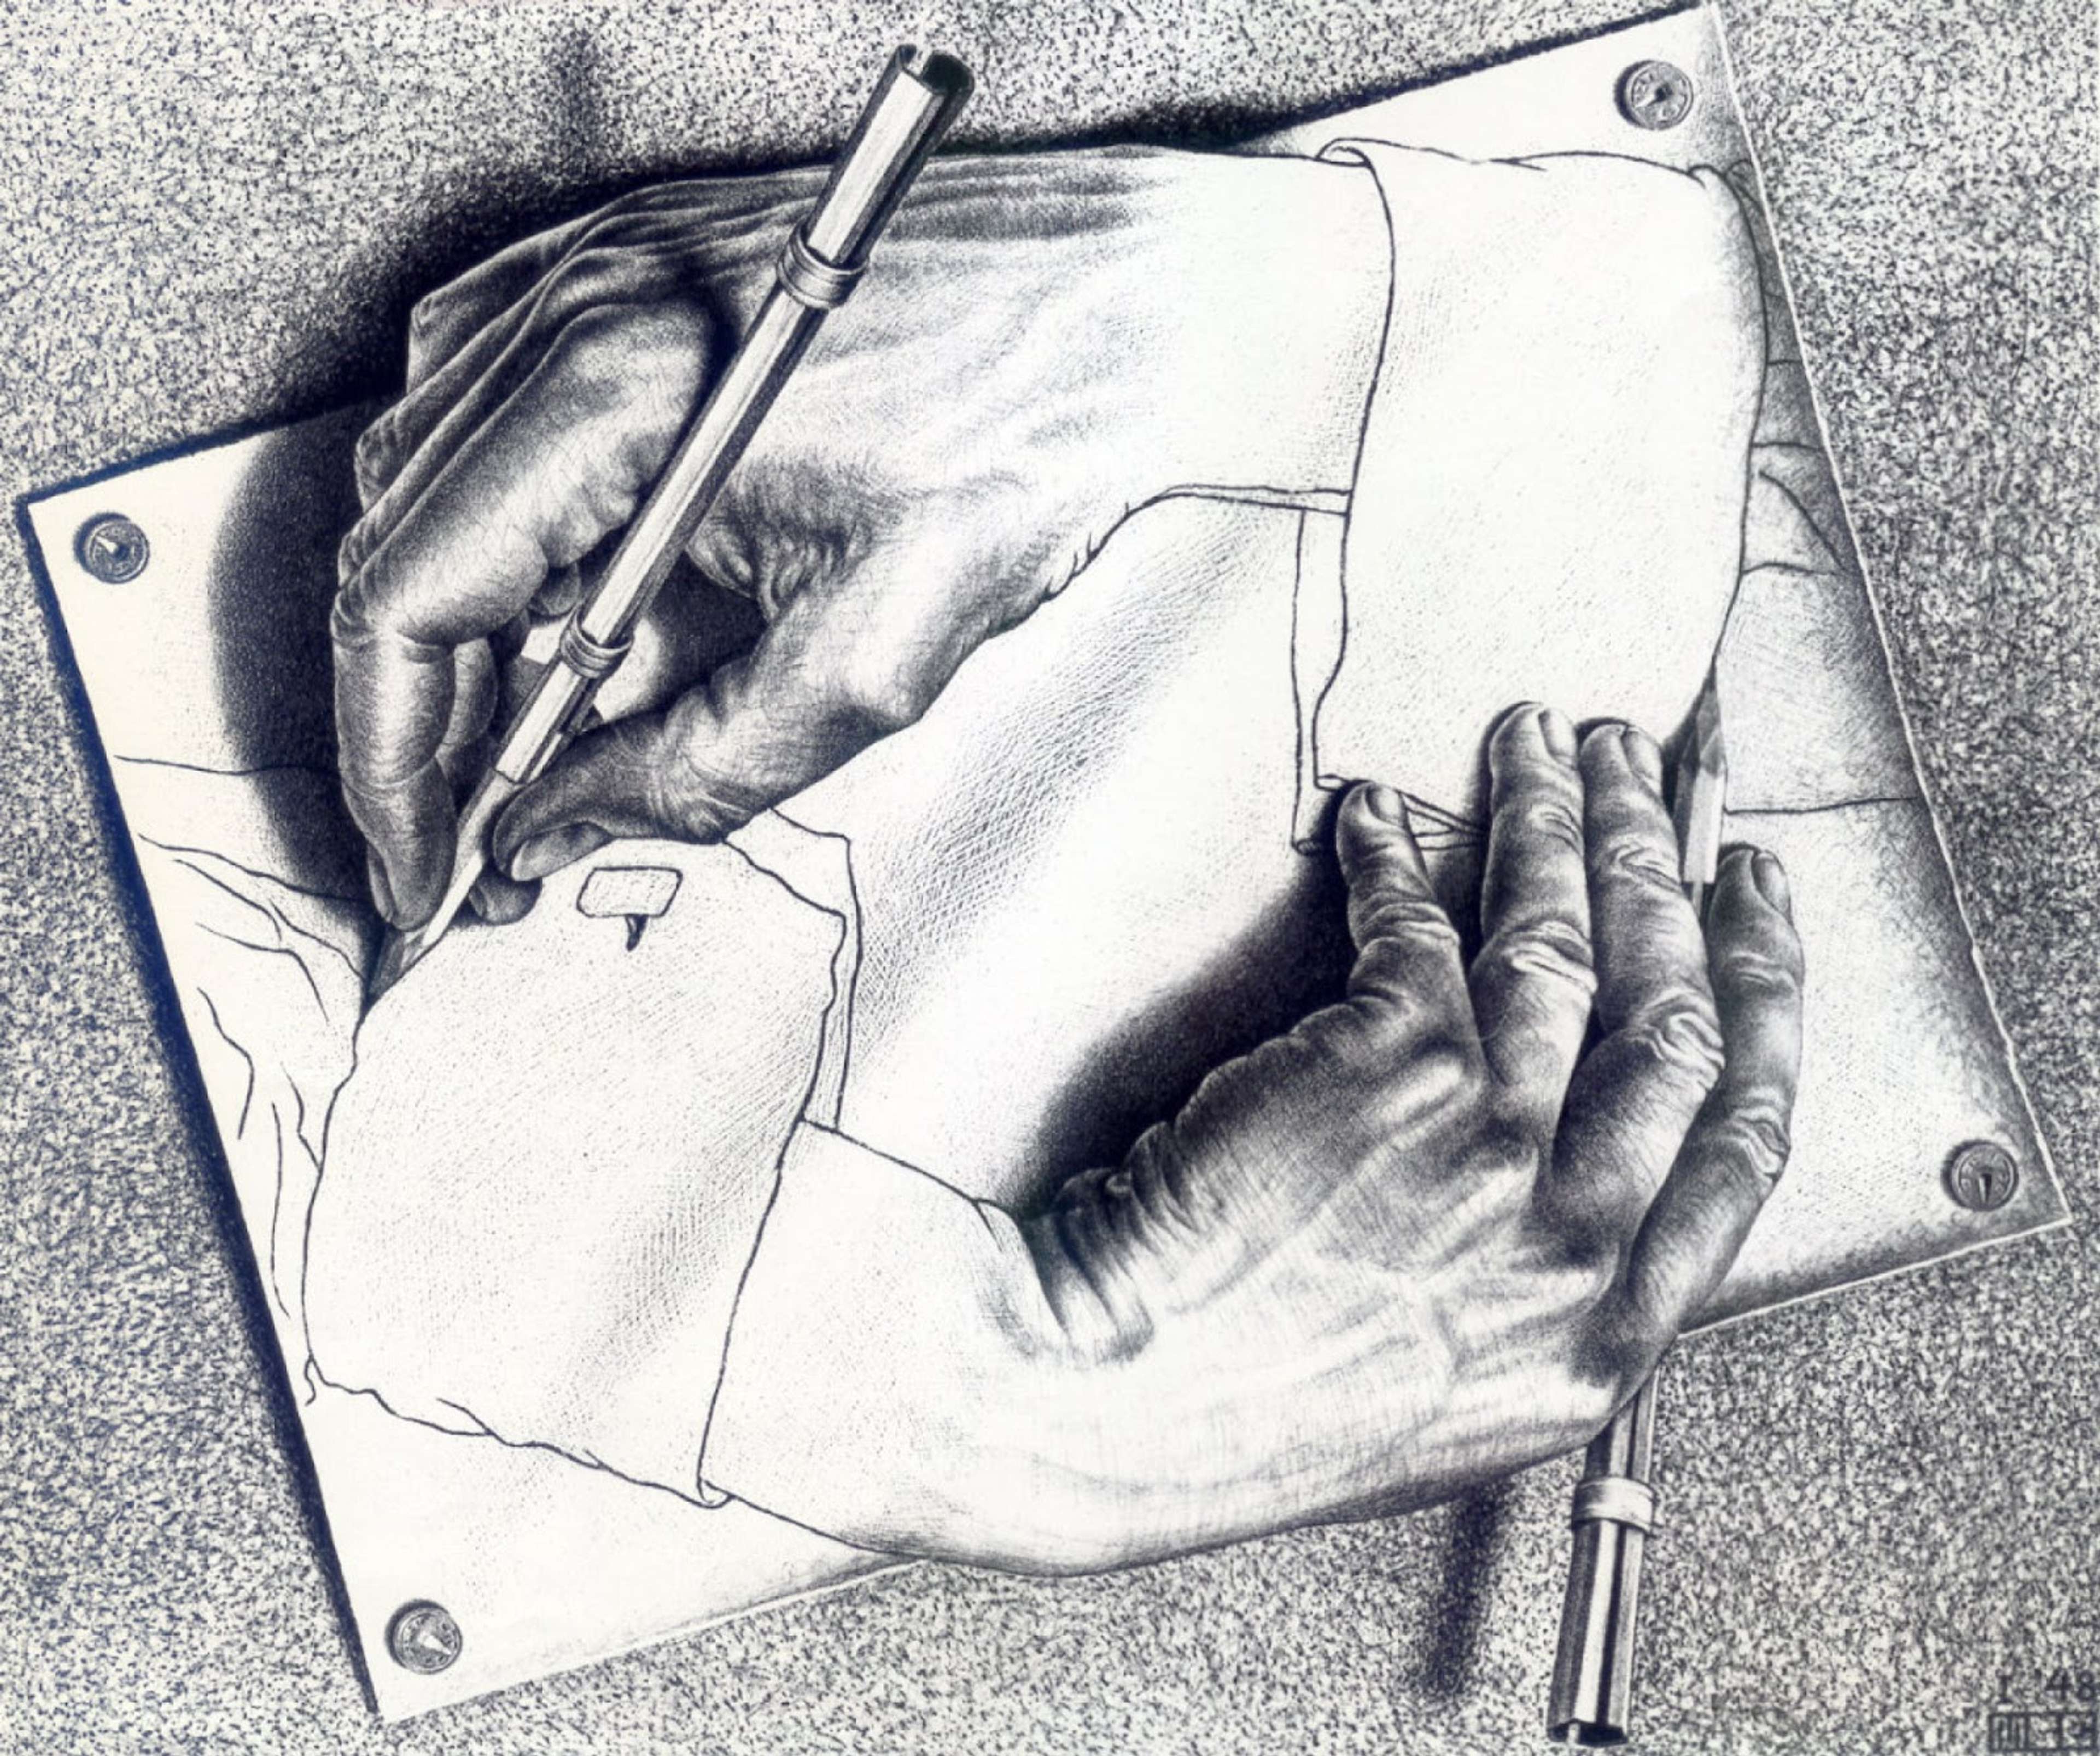 A lithograph print titled "Drawing Hands" by M.C. Escher, depicting two hands holding pencils, drawing the outline of each other, creating an impossible paradox.